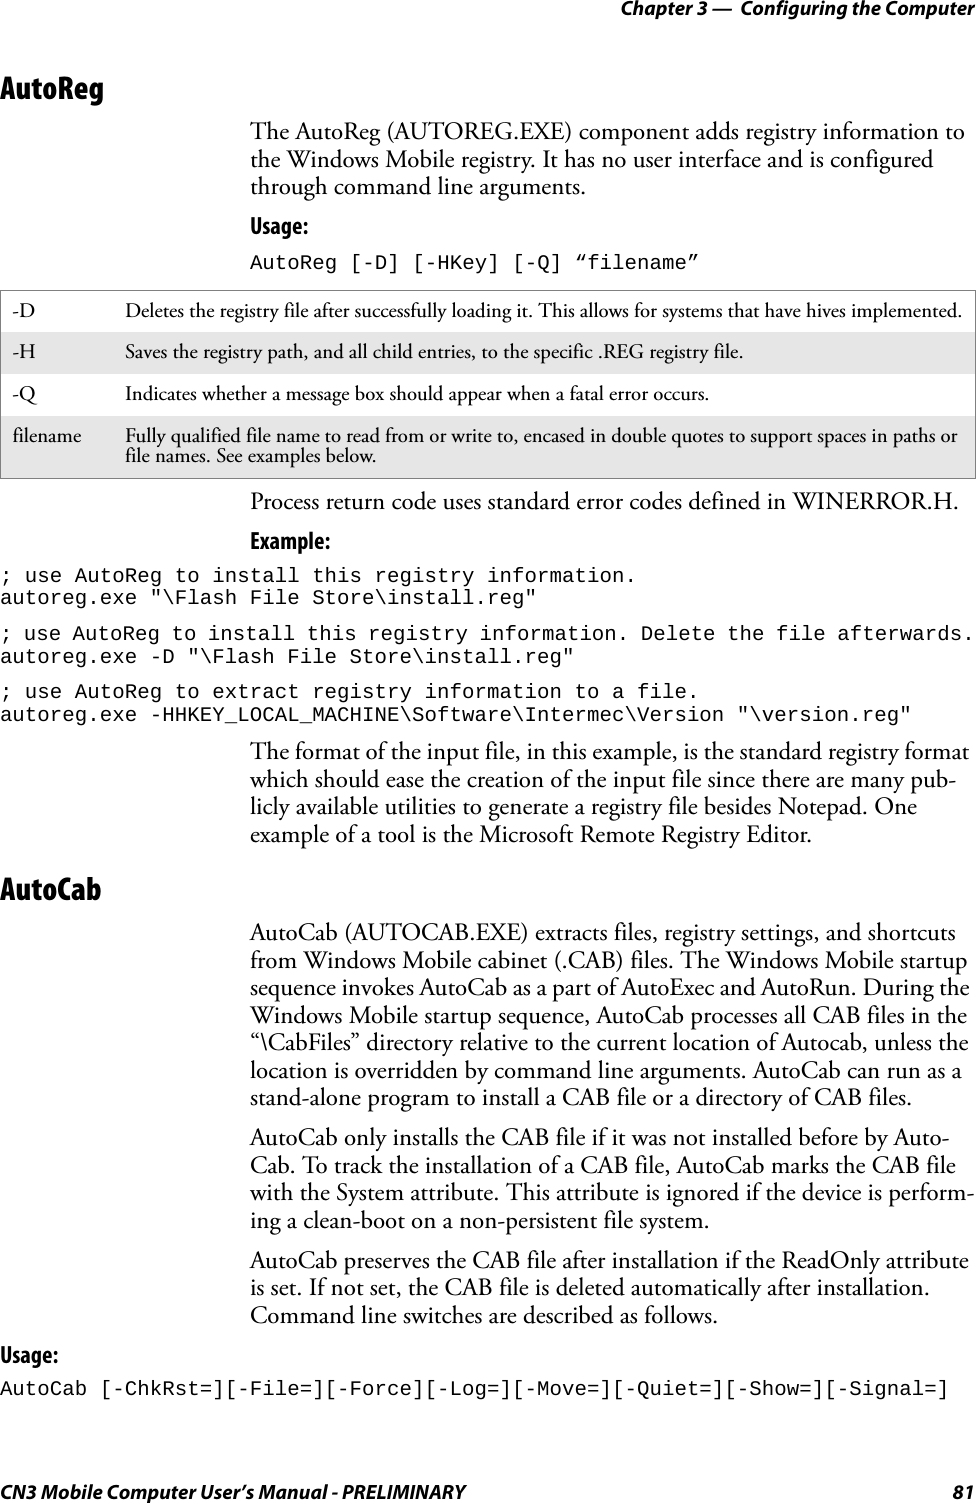 Chapter 3 —  Configuring the ComputerCN3 Mobile Computer User’s Manual - PRELIMINARY 81AutoRegThe AutoReg (AUTOREG.EXE) component adds registry information to the Windows Mobile registry. It has no user interface and is configured through command line arguments. Usage: AutoReg [-D] [-HKey] [-Q] “filename”Process return code uses standard error codes defined in WINERROR.H.Example:; use AutoReg to install this registry information.autoreg.exe &quot;\Flash File Store\install.reg&quot;; use AutoReg to install this registry information. Delete the file afterwards.autoreg.exe -D &quot;\Flash File Store\install.reg&quot;; use AutoReg to extract registry information to a file. autoreg.exe -HHKEY_LOCAL_MACHINE\Software\Intermec\Version &quot;\version.reg&quot;The format of the input file, in this example, is the standard registry format which should ease the creation of the input file since there are many pub-licly available utilities to generate a registry file besides Notepad. One example of a tool is the Microsoft Remote Registry Editor.AutoCabAutoCab (AUTOCAB.EXE) extracts files, registry settings, and shortcuts from Windows Mobile cabinet (.CAB) files. The Windows Mobile startup sequence invokes AutoCab as a part of AutoExec and AutoRun. During the Windows Mobile startup sequence, AutoCab processes all CAB files in the “\CabFiles” directory relative to the current location of Autocab, unless the location is overridden by command line arguments. AutoCab can run as a stand-alone program to install a CAB file or a directory of CAB files.AutoCab only installs the CAB file if it was not installed before by Auto-Cab. To track the installation of a CAB file, AutoCab marks the CAB file with the System attribute. This attribute is ignored if the device is perform-ing a clean-boot on a non-persistent file system.AutoCab preserves the CAB file after installation if the ReadOnly attribute is set. If not set, the CAB file is deleted automatically after installation. Command line switches are described as follows.Usage:AutoCab [-ChkRst=][-File=][-Force][-Log=][-Move=][-Quiet=][-Show=][-Signal=]-D Deletes the registry file after successfully loading it. This allows for systems that have hives implemented.-H Saves the registry path, and all child entries, to the specific .REG registry file.-Q Indicates whether a message box should appear when a fatal error occurs.filename Fully qualified file name to read from or write to, encased in double quotes to support spaces in paths or file names. See examples below.